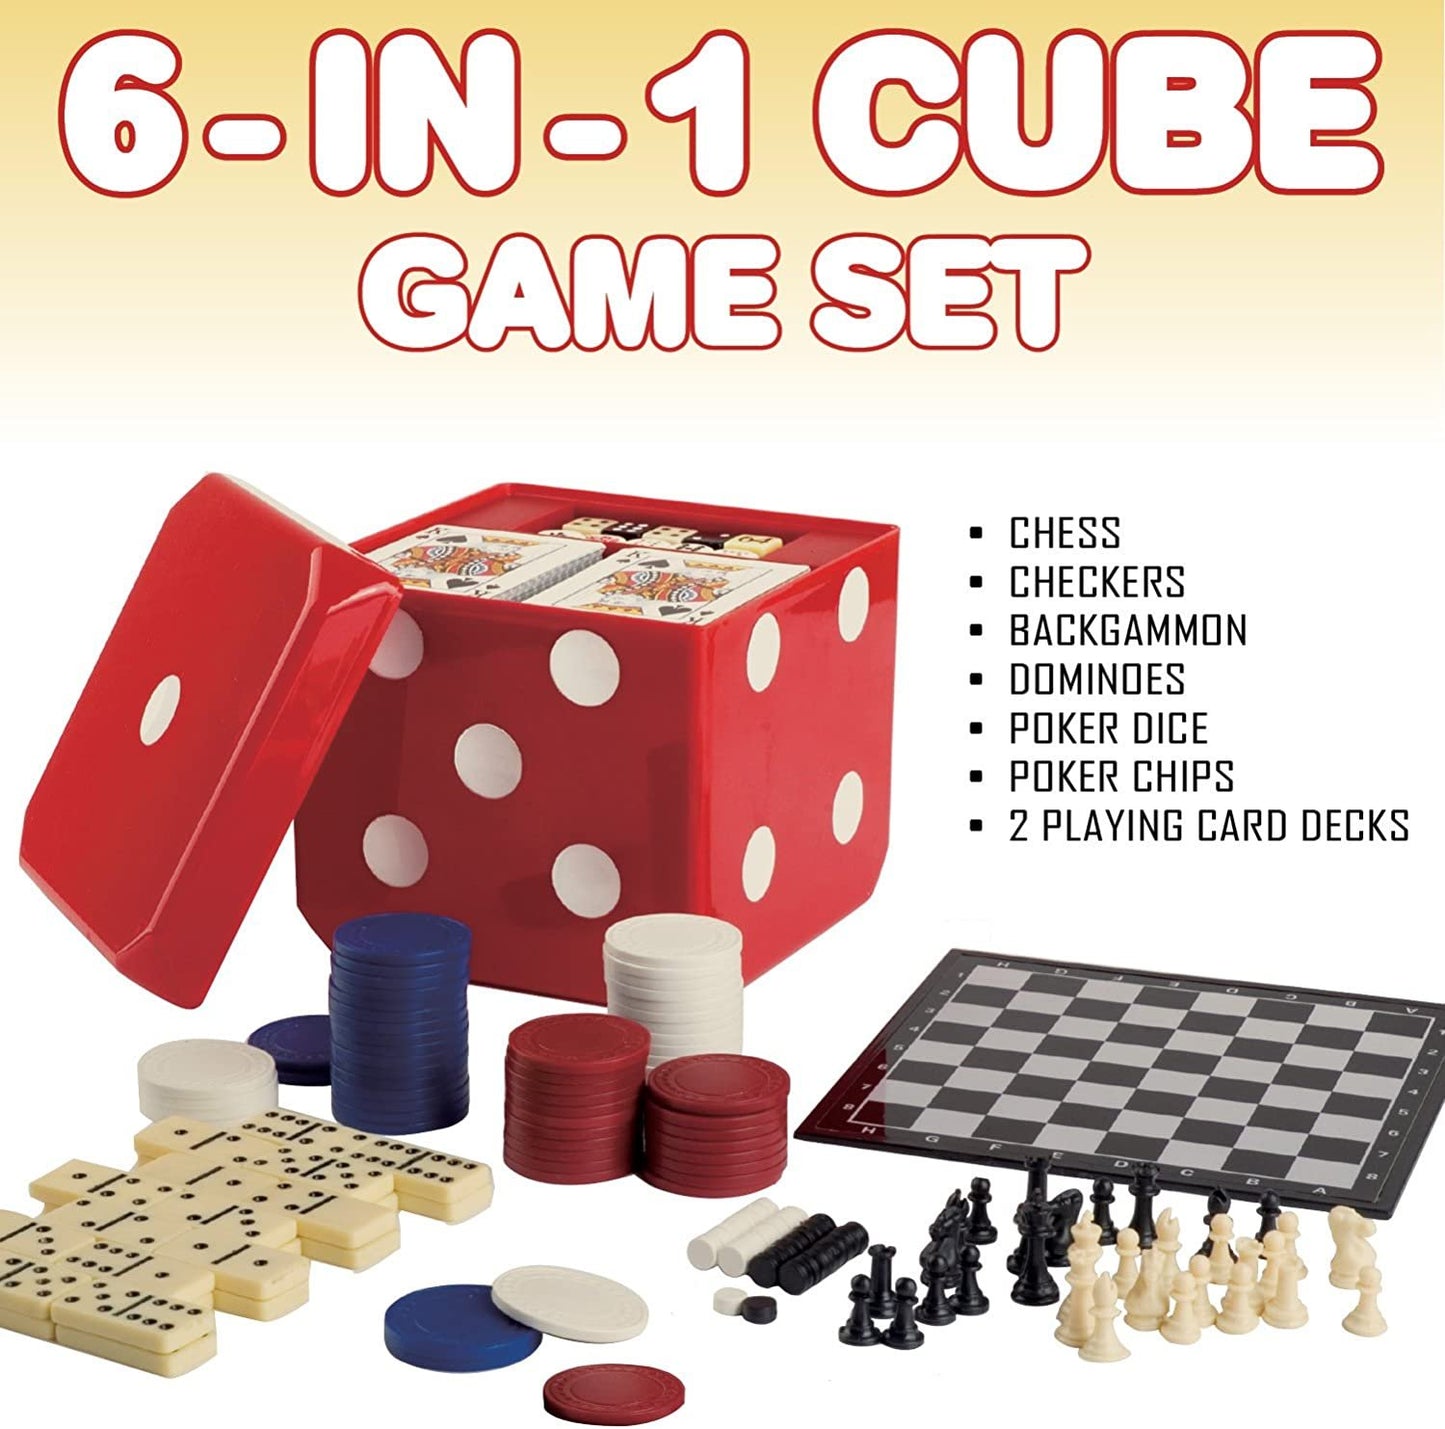 6-IN-1 Dice Cube Game Set - by GAMIE - Board Game and Casino Set – Includes Chess, Checkers and Backgammon, 2 Decks of Playing Cards, Poker Chips, Poker Dice and Dominoes - Complete Kit for Family Fun